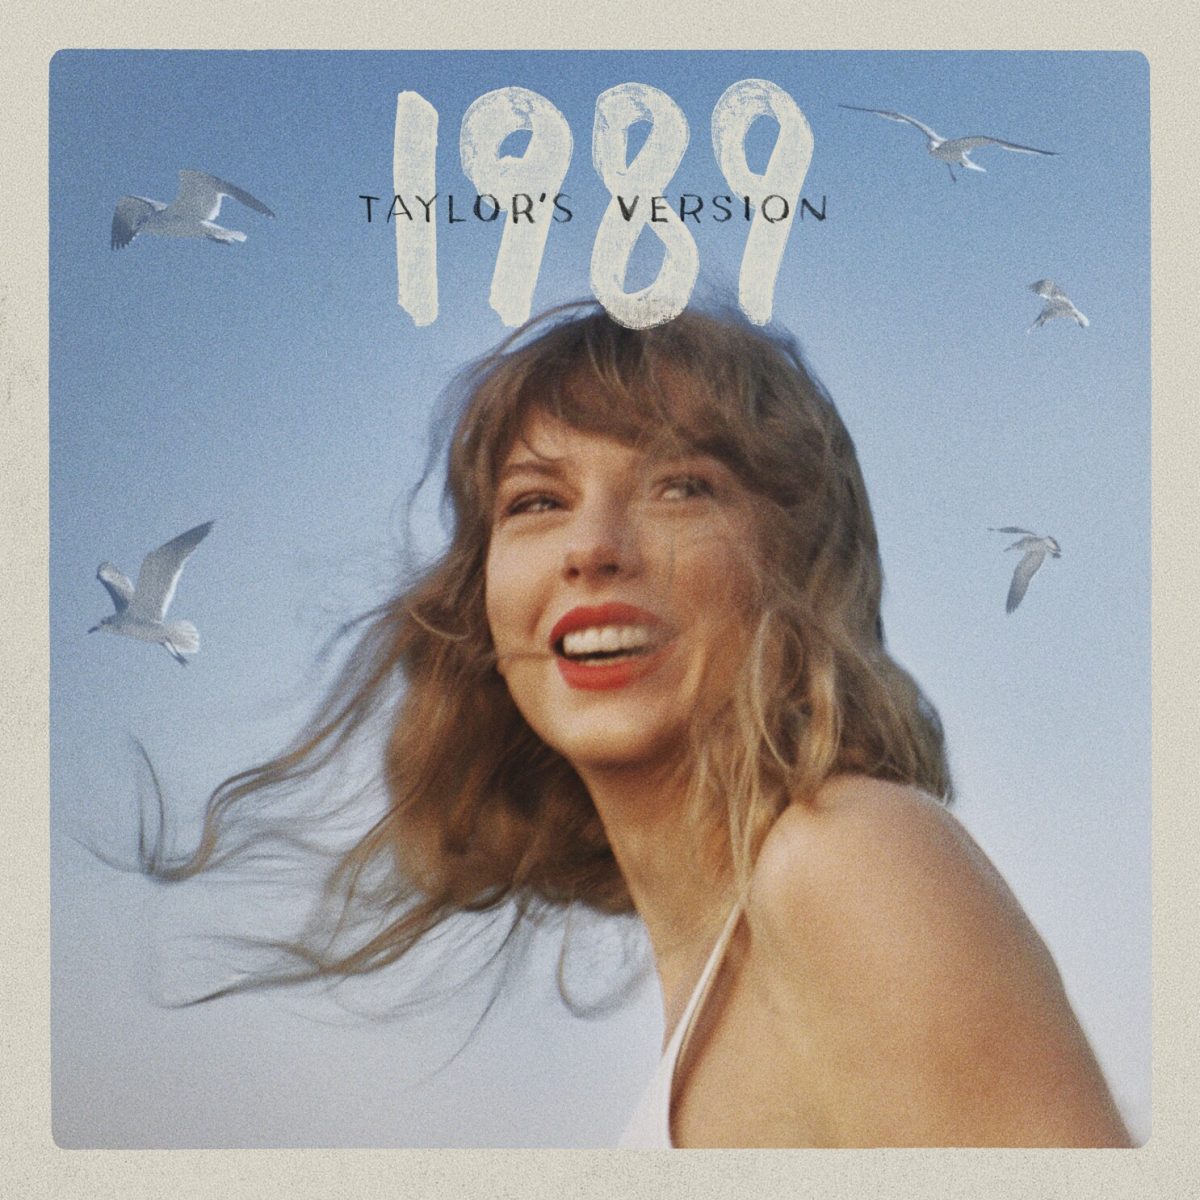 This+cover+image+released+by+Republic+Records+shows+1989+%28Taylor%E2%80%99s+Version%29+by+Taylor+Swift.+%28Republic+Records+via+AP%29